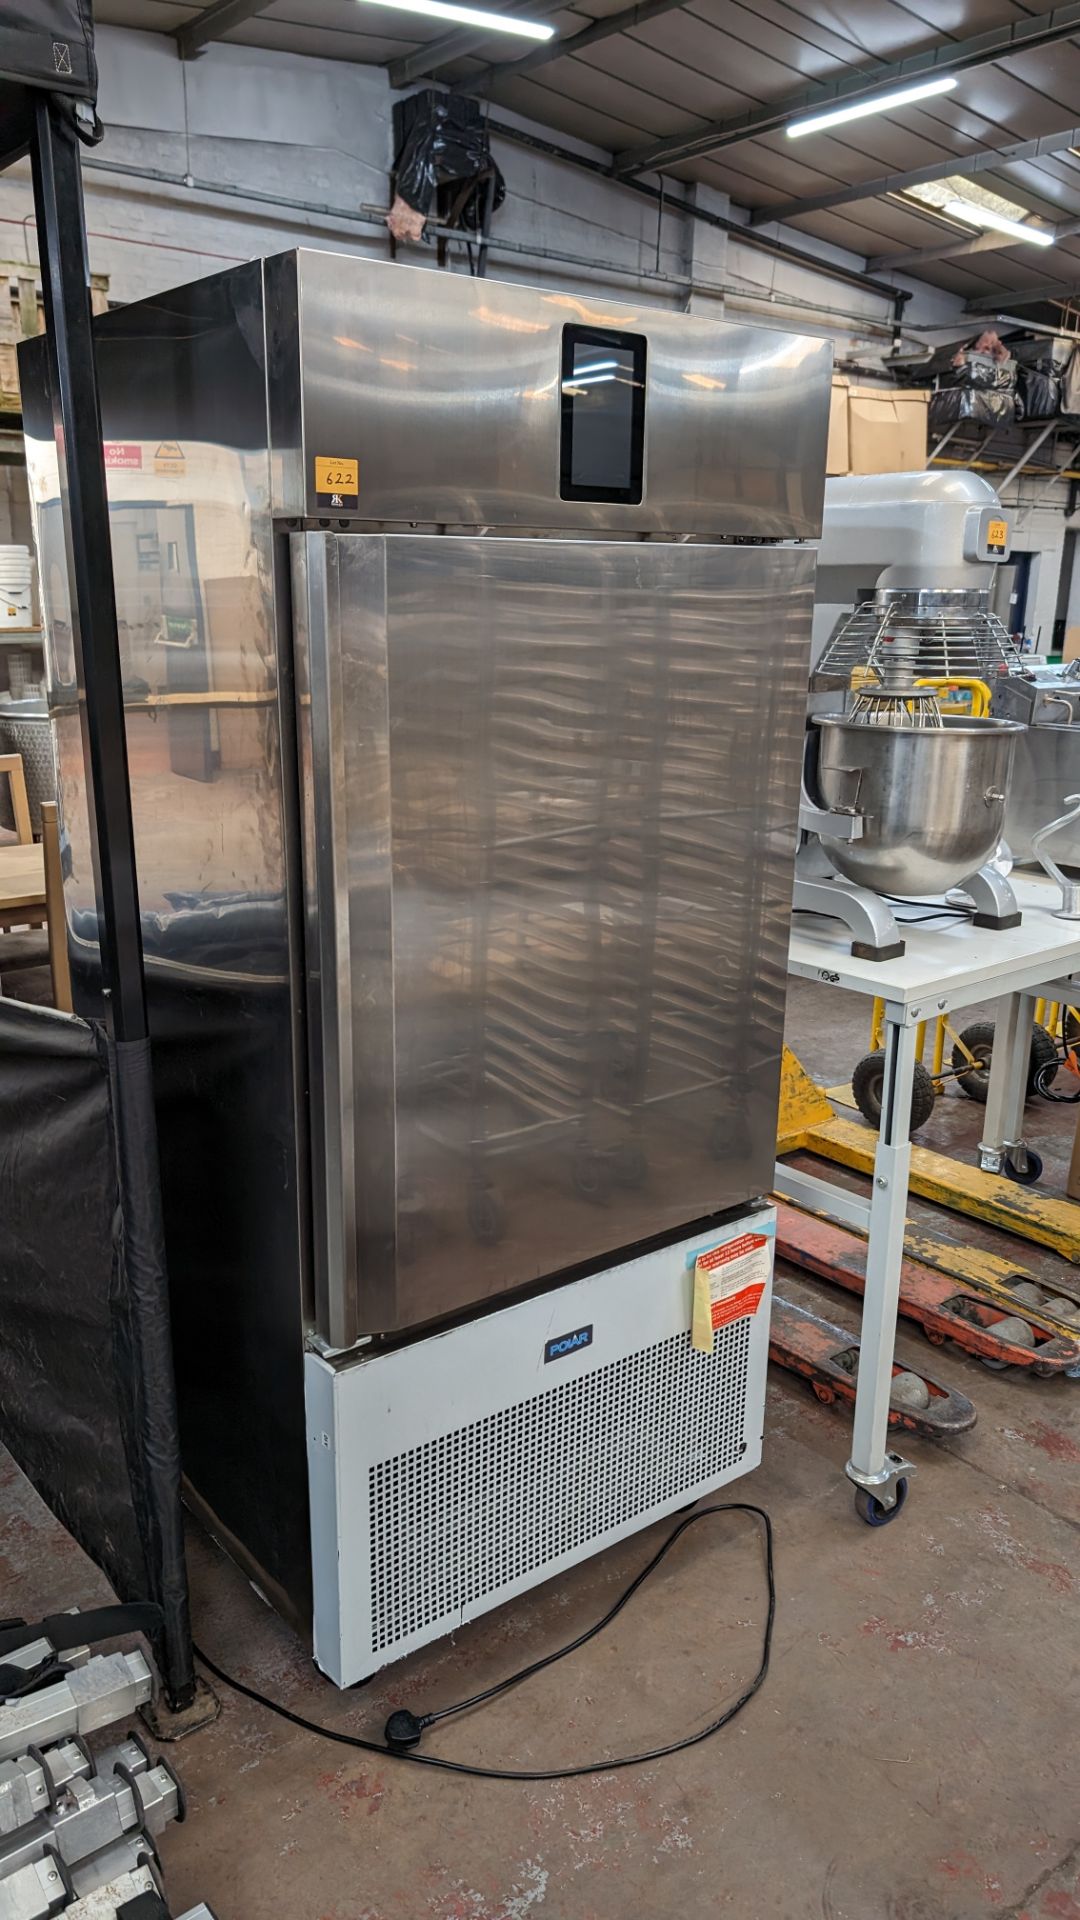 Polar Refrigeration mobile stainless steel commercial blast chiller with touchscreen controls - Bild 2 aus 9